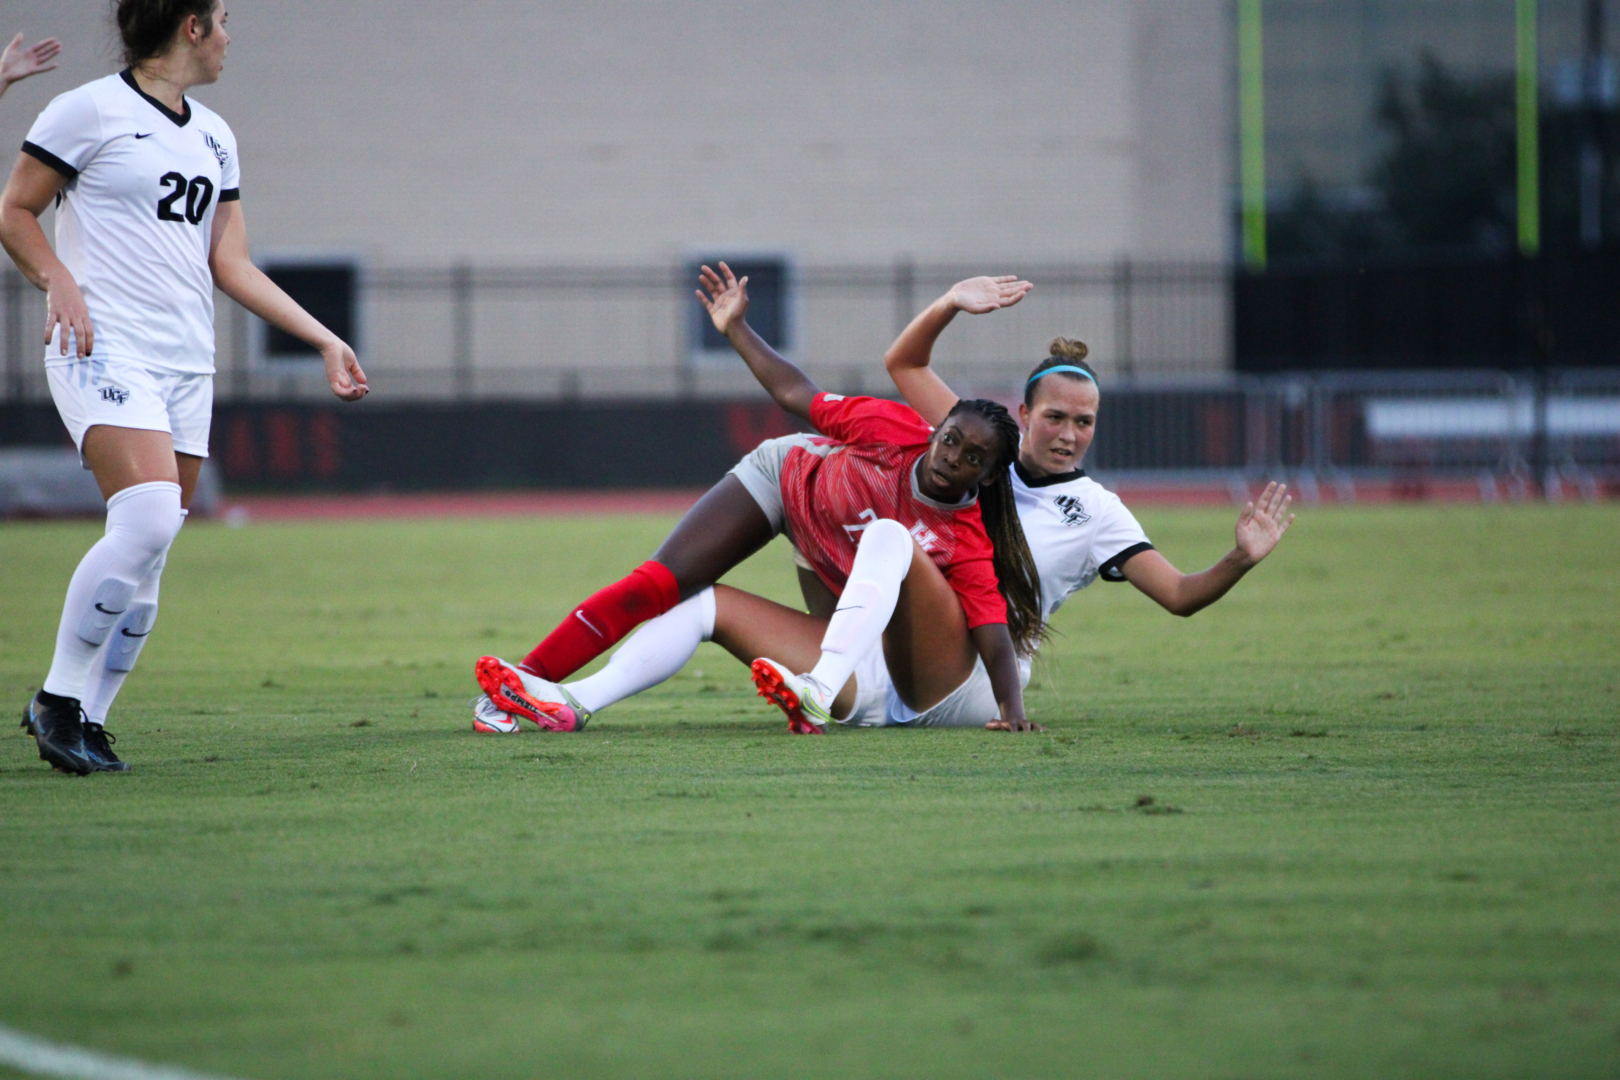 UH soccer suffered its second loss of the season on Sunday, falling to No. 10 TCU 3-1 in Fort Worth. | Sean Thomas/The Cougar